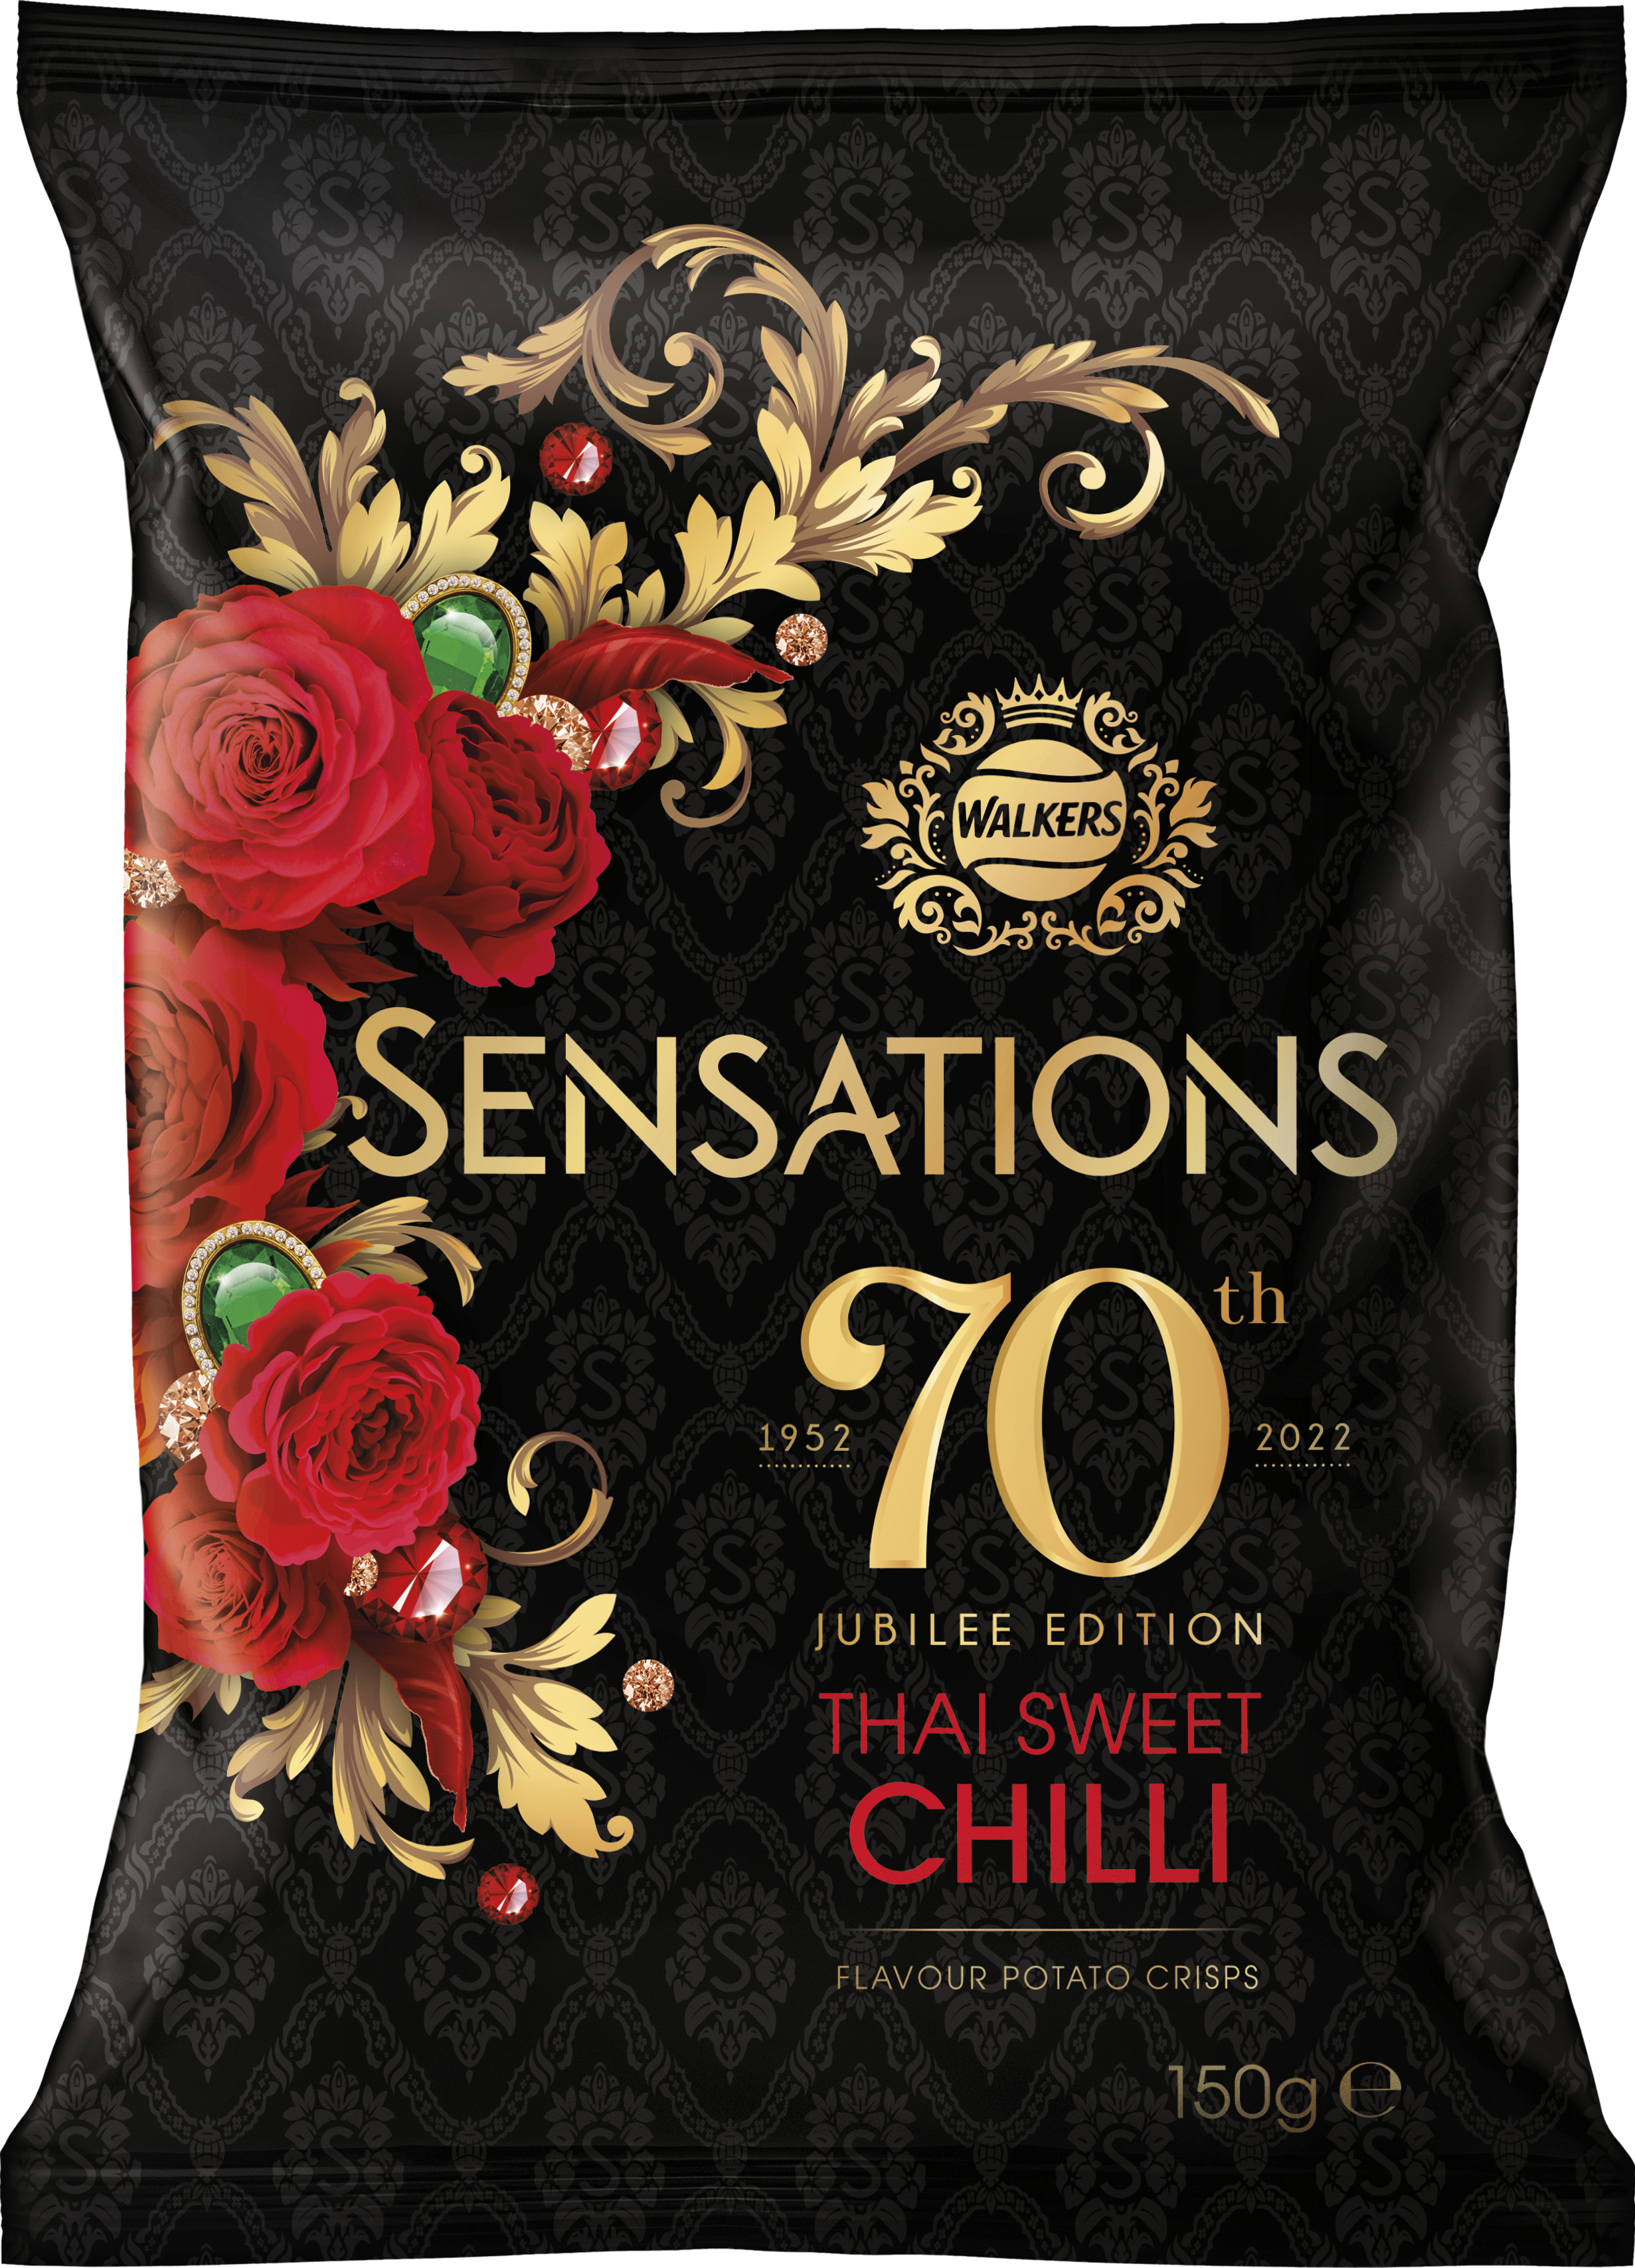 Sensations celebrates Platinum Jubilee with limited-edition flavours